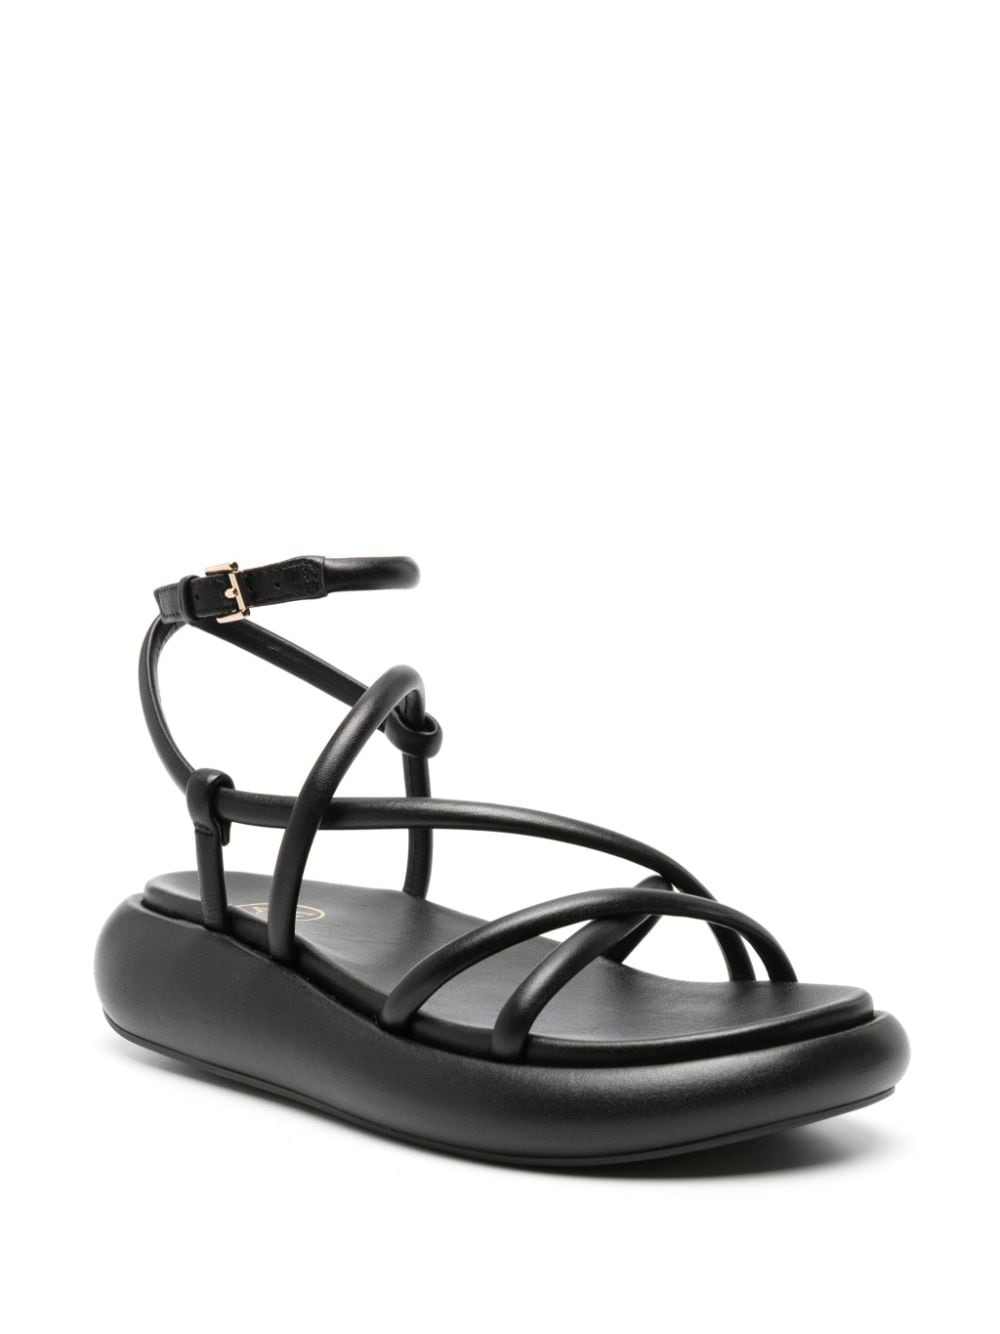 Vice leather sandals<BR/><BR/><BR/>